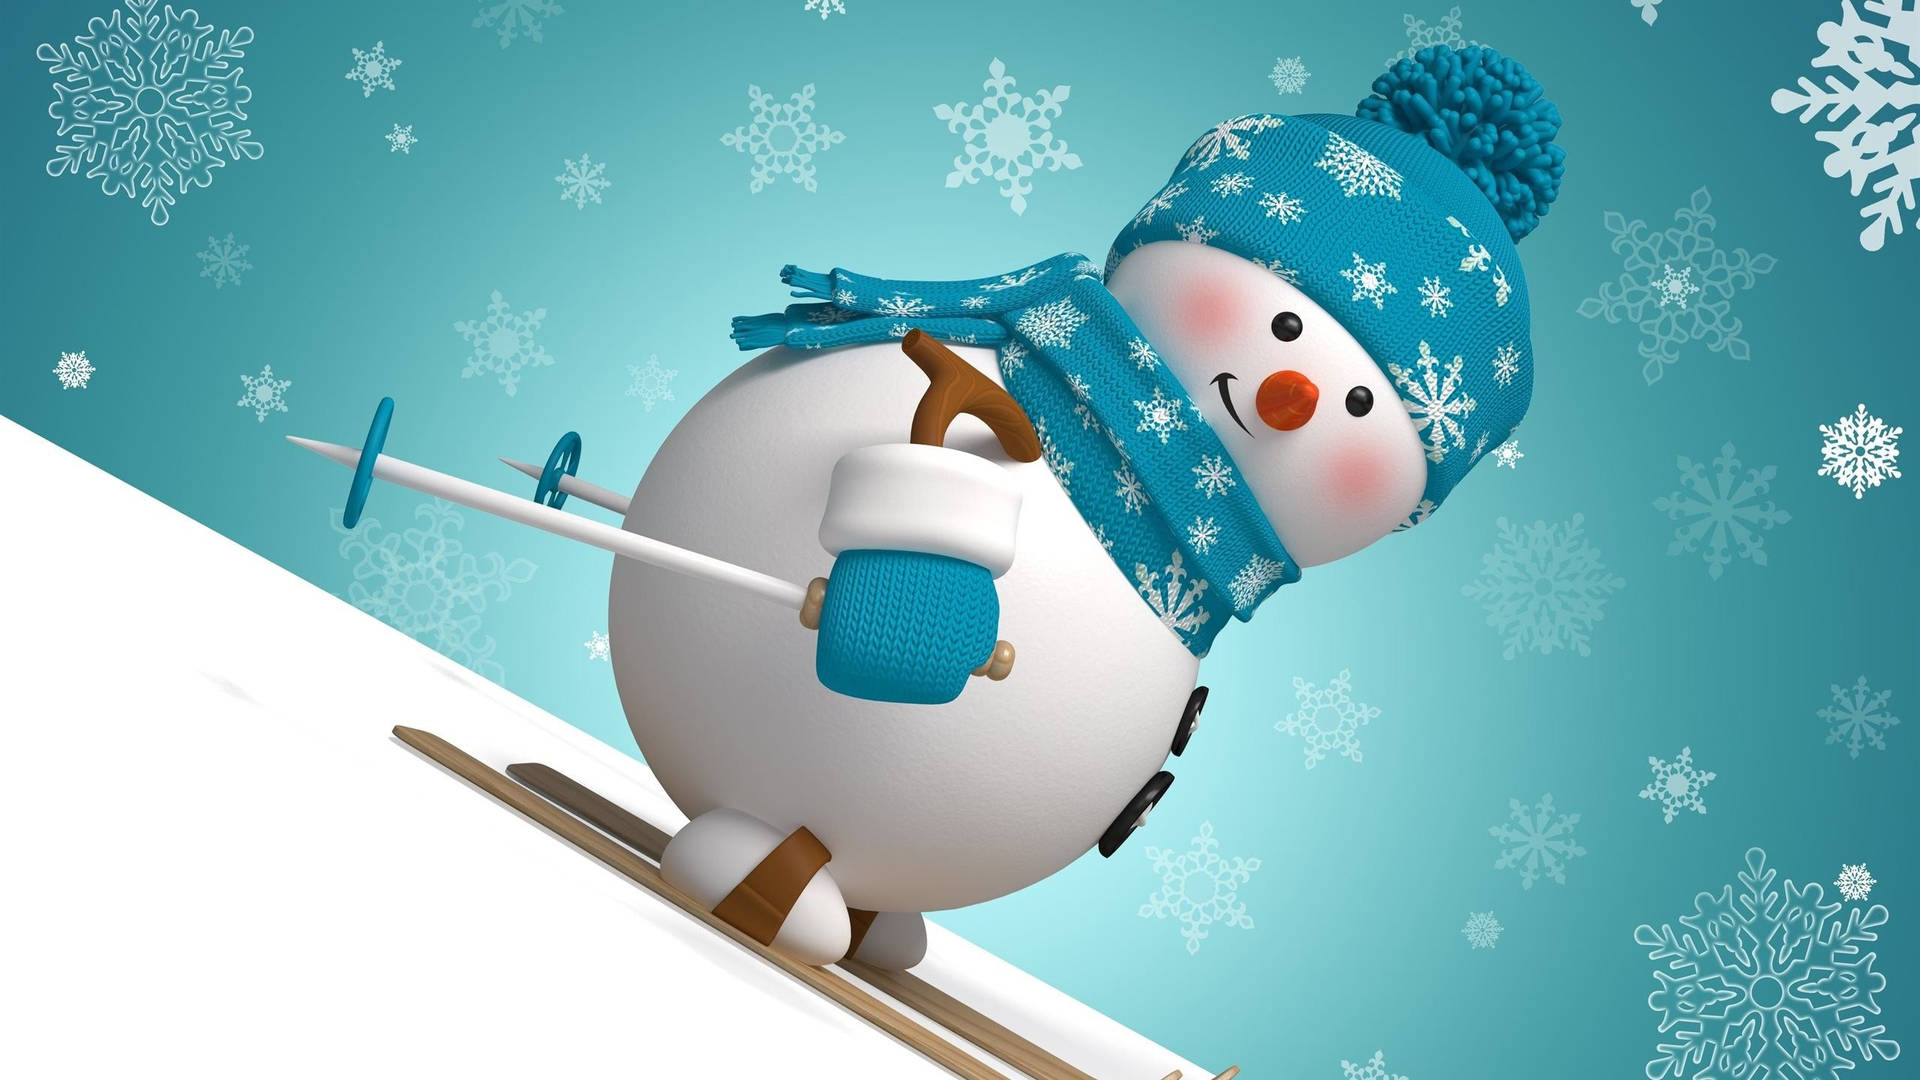 Snowman 2560X1440 Wallpaper and Background Image